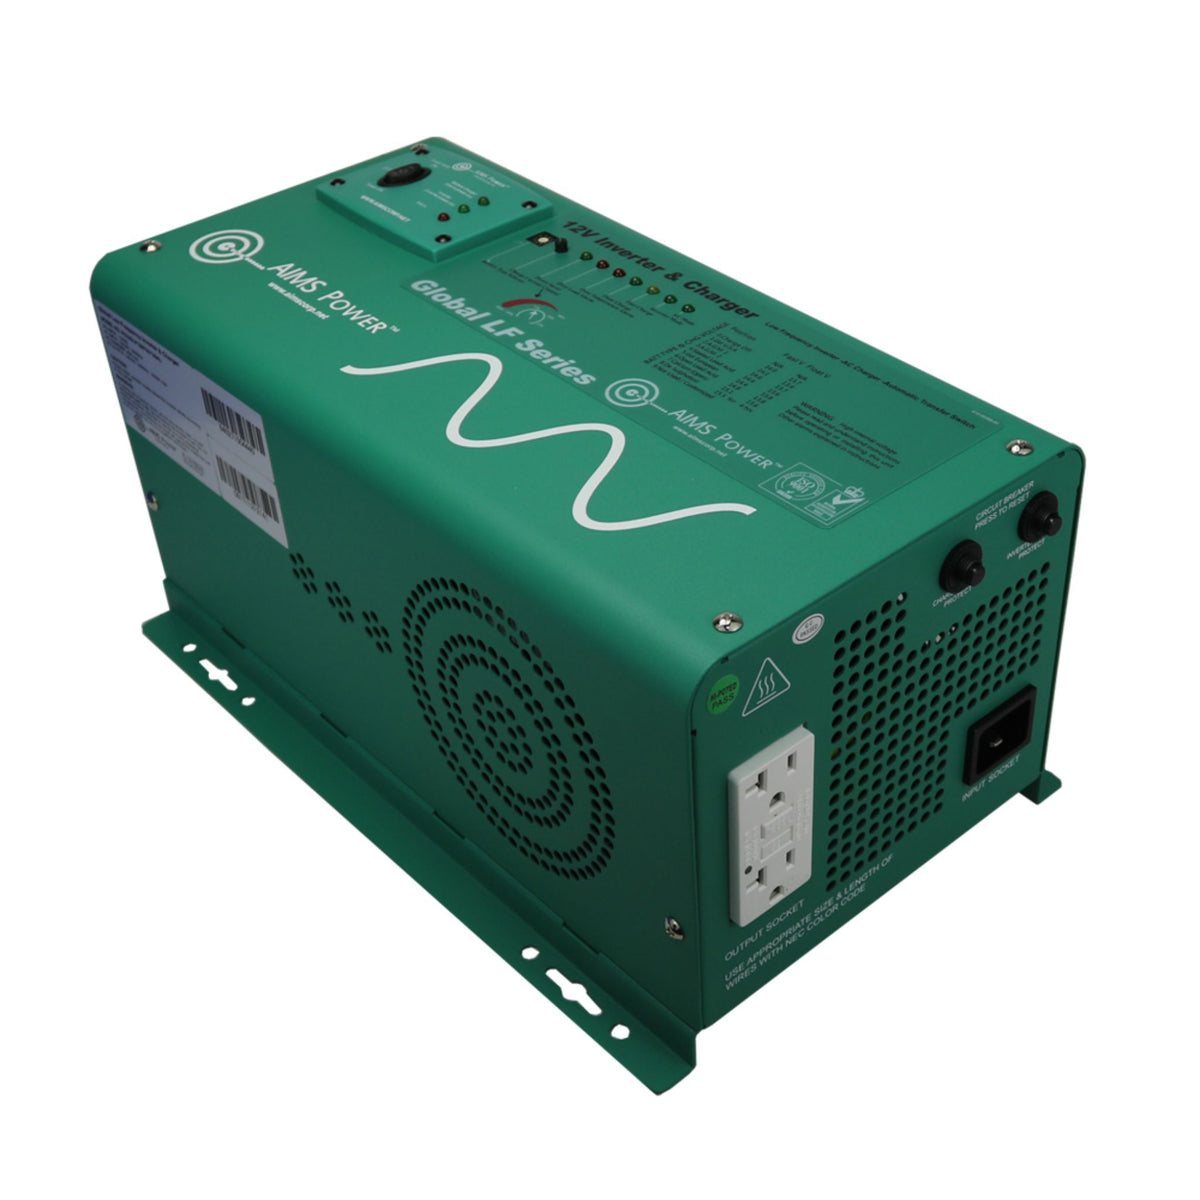 AIMS Power  1250 Watt Low Frequency Pure Sine Inverter Charger